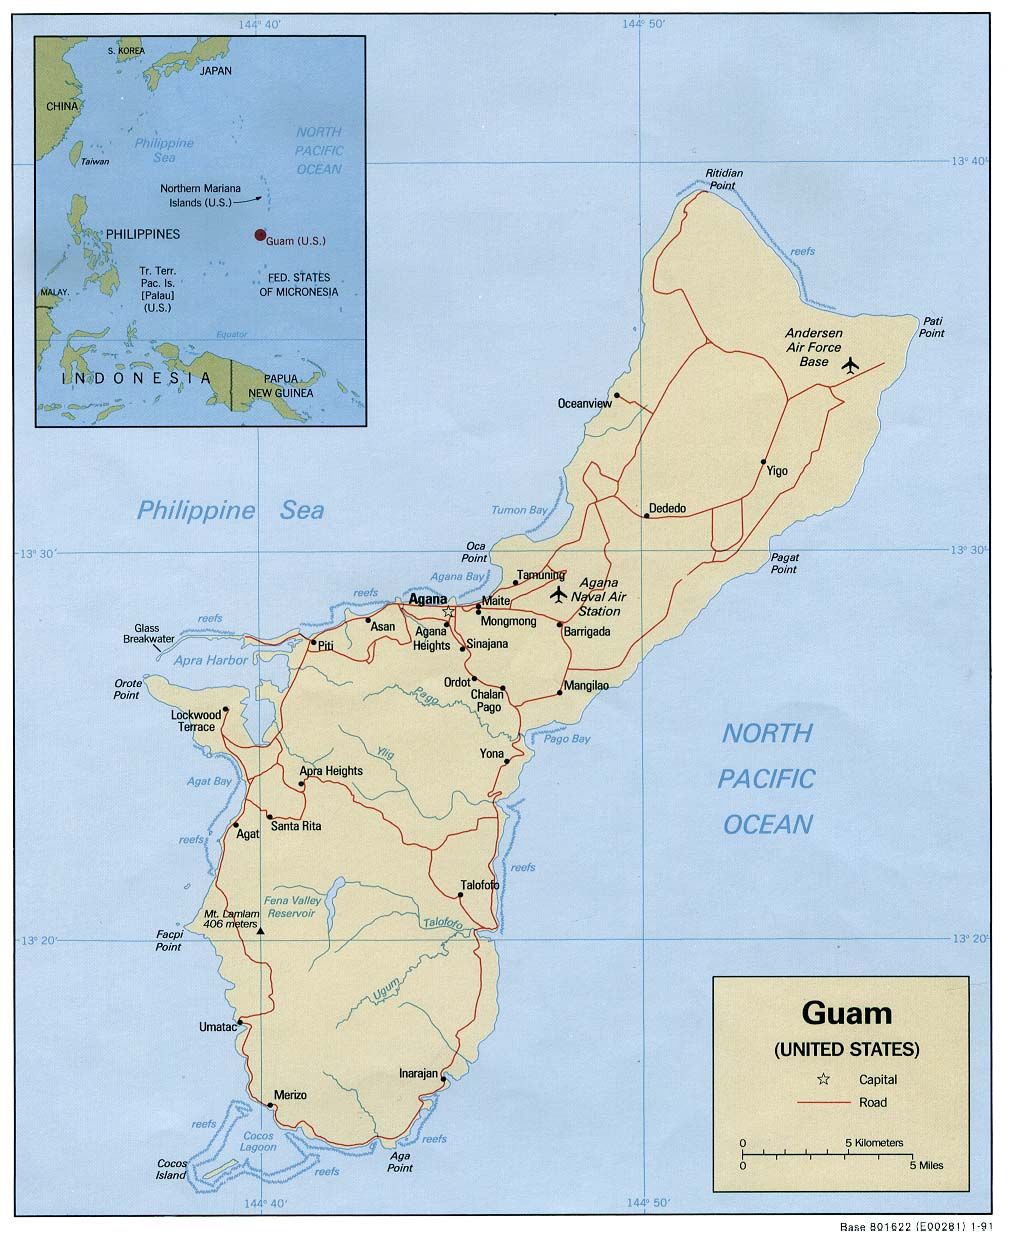 Map of Guåhan - Guam (Political), 1991. Courtesy of, The World Factbook (http://cia.gov/cia/publications/factbook) or CIA Maps and Publications Released to the Public (http://www.cia.gov/cia/publications/mapspub), Central Intelligence Agency (CIA), Government of the United States of America (USA); and the Perry-Castaeda Map Collection (http://www.lib.utexas.edu/maps), Perry-Castaeda Library, The General Libraries, University of Texas at Austin, Austin, Texas, USA.